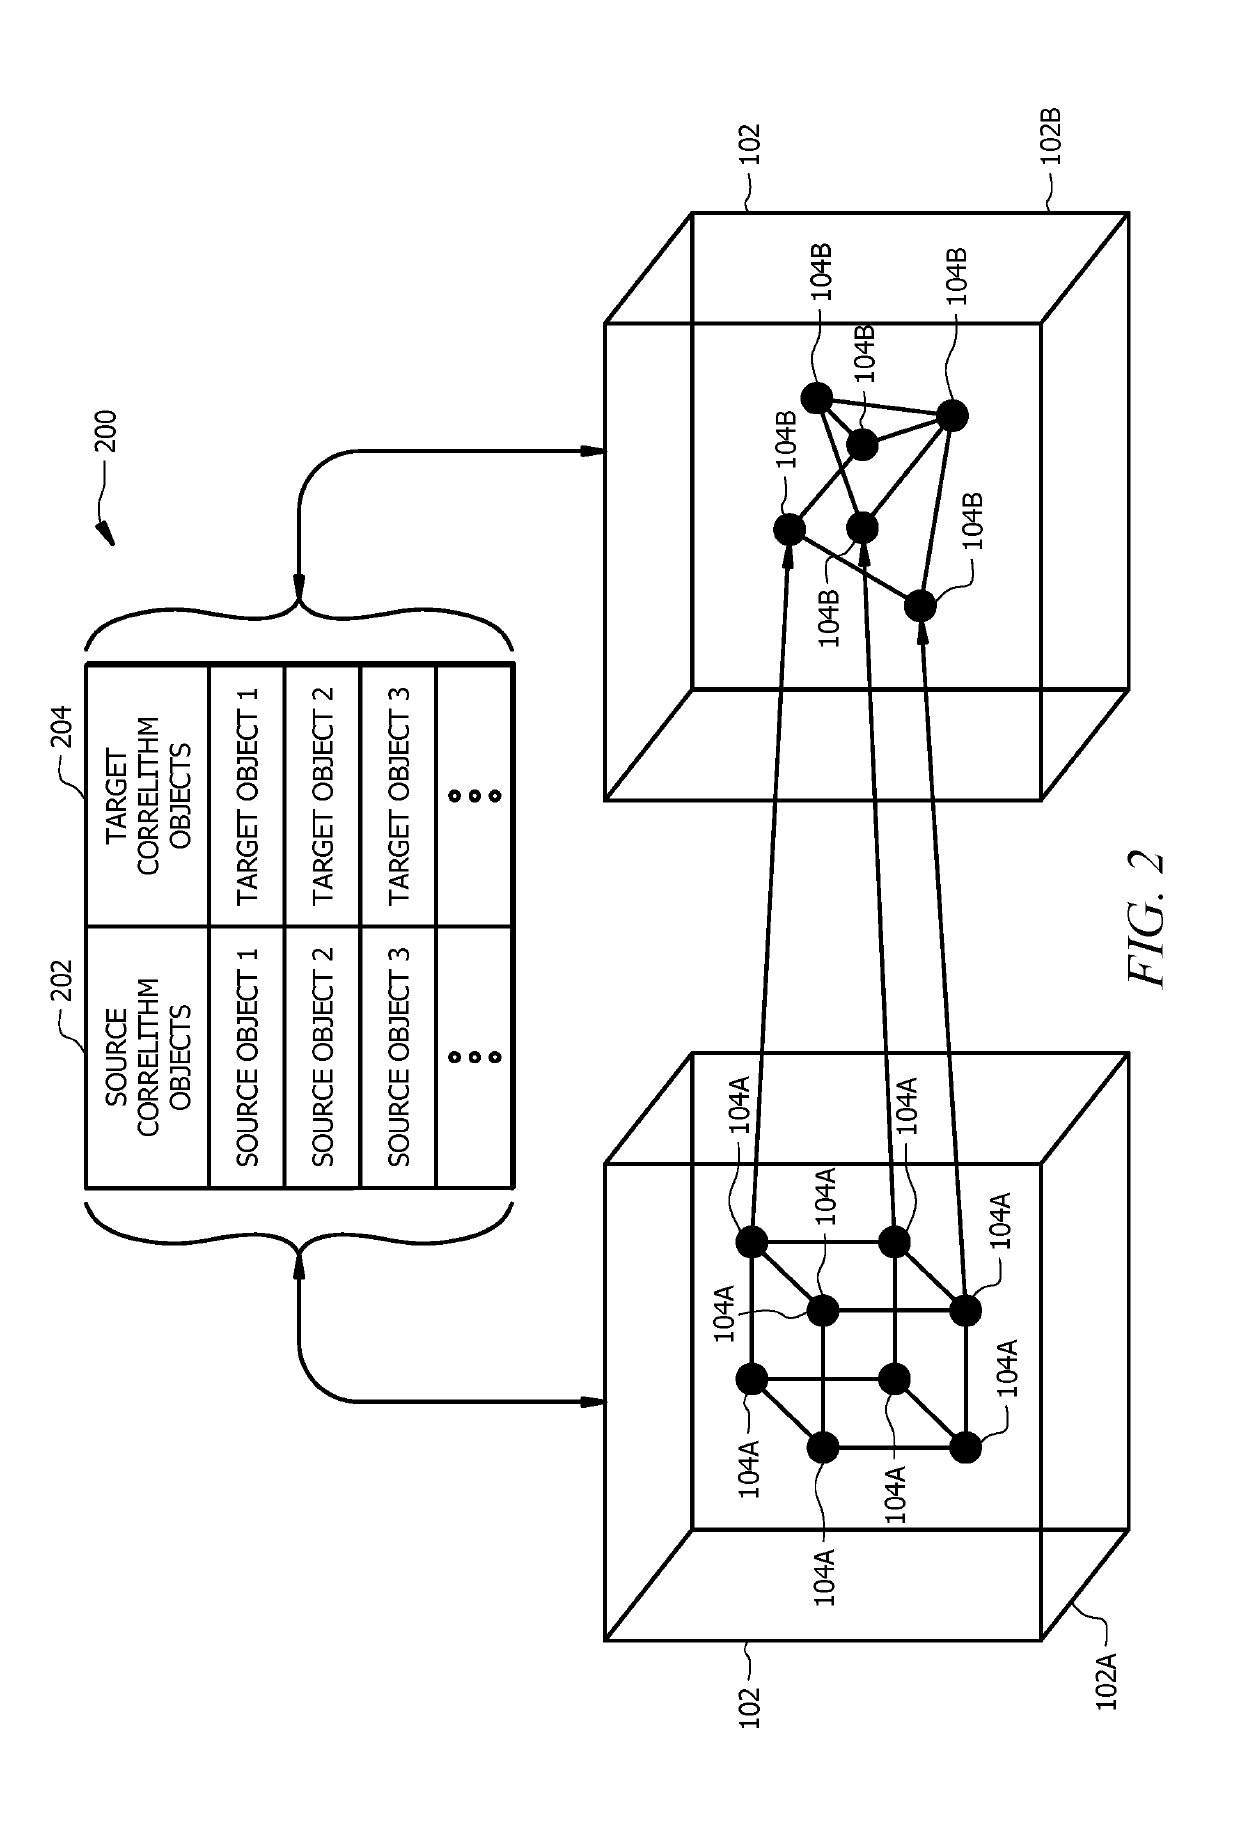 Computer architecture for emulating a correlithm object processing system that uses multiple correlithm objects in a distributed node network